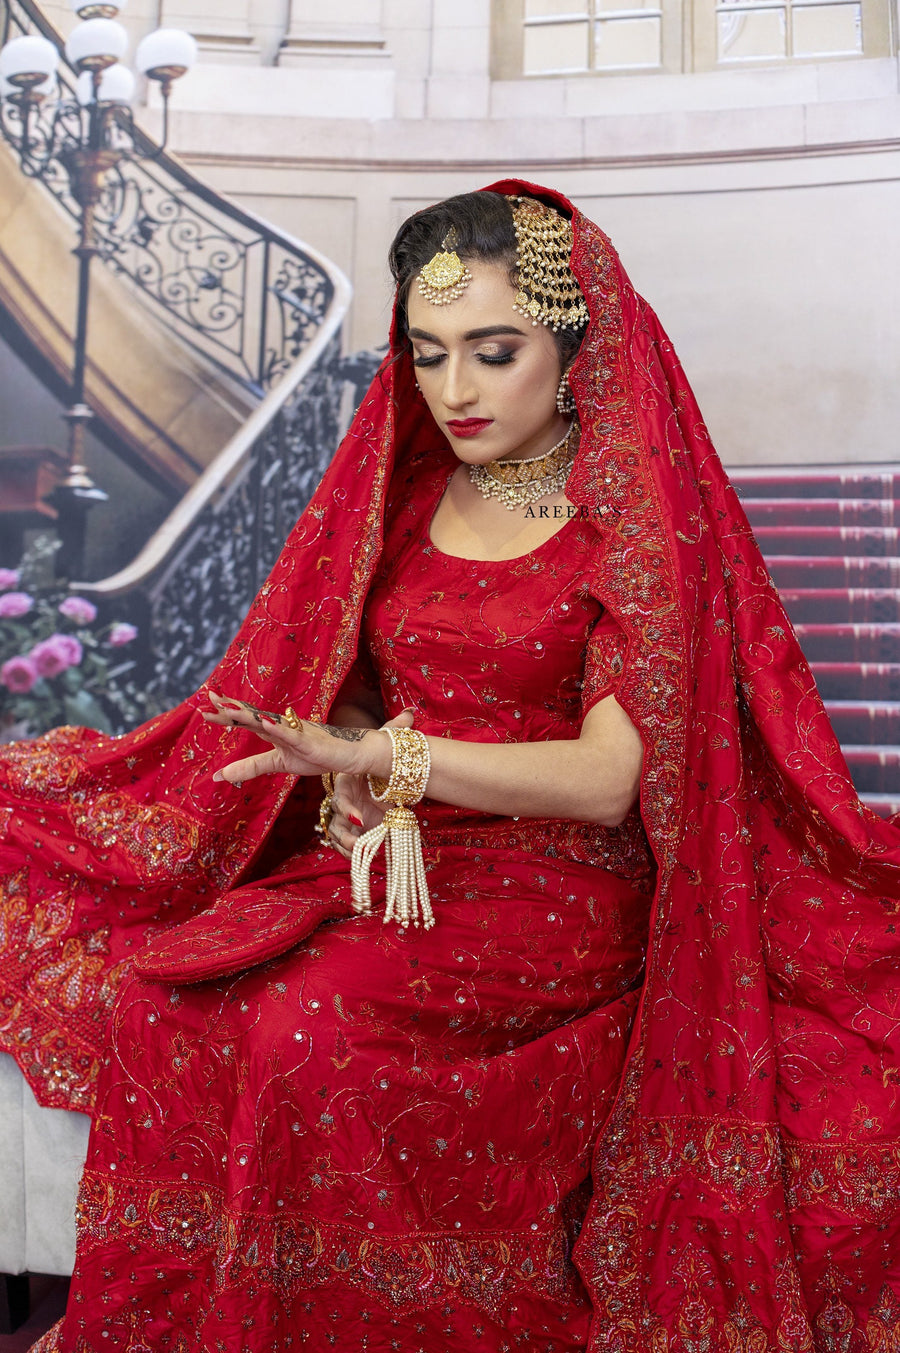 NK bridal Red- Areeba's Couture